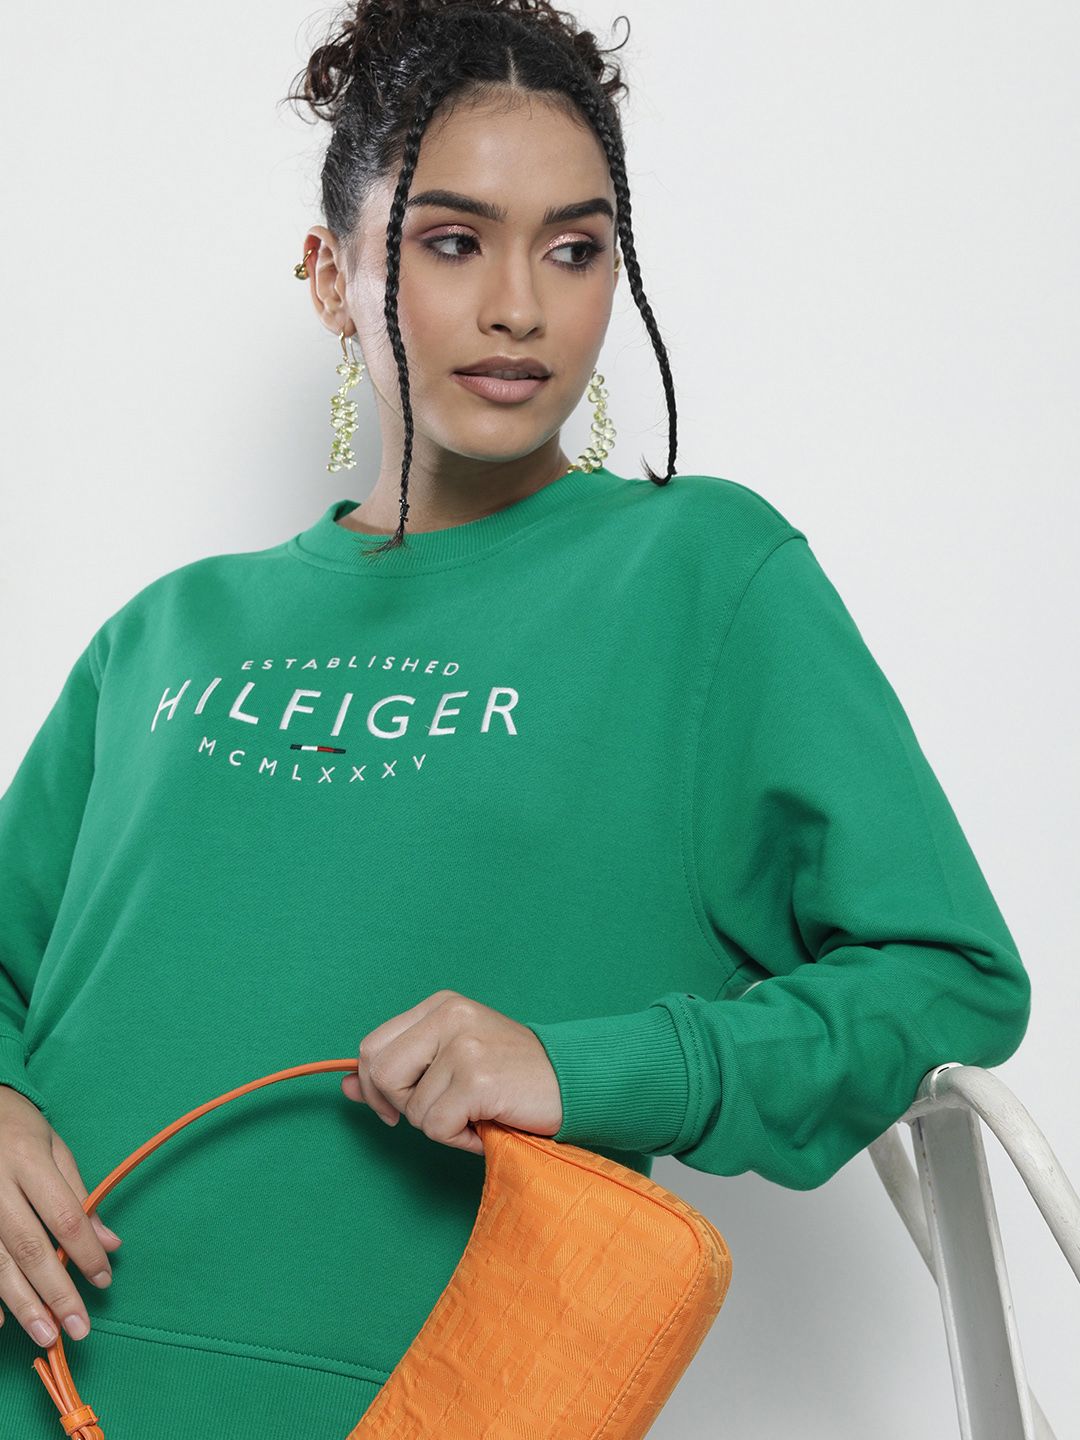 Tommy Hilfiger Women Green & White Embroidered Sweatshirt Price in India